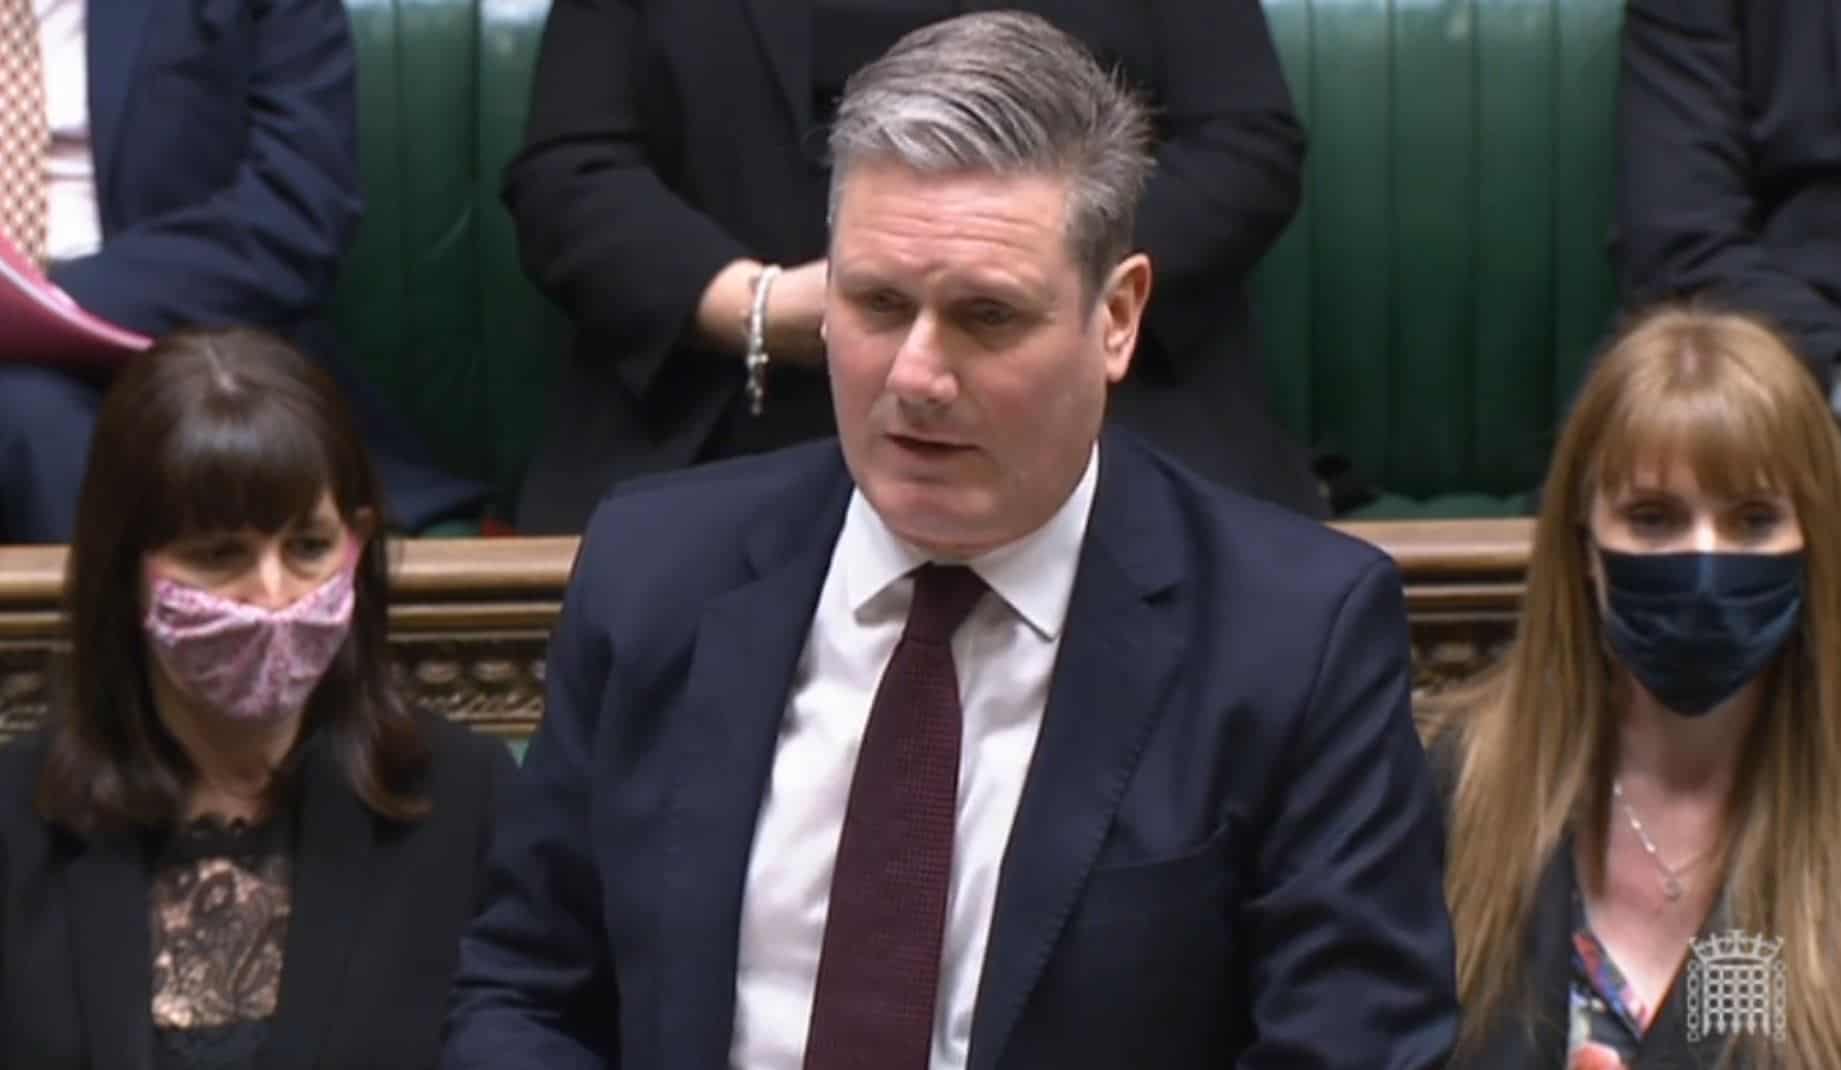 ‘Everybody’s fault but his’: Starmer savages Johnson over Gray report